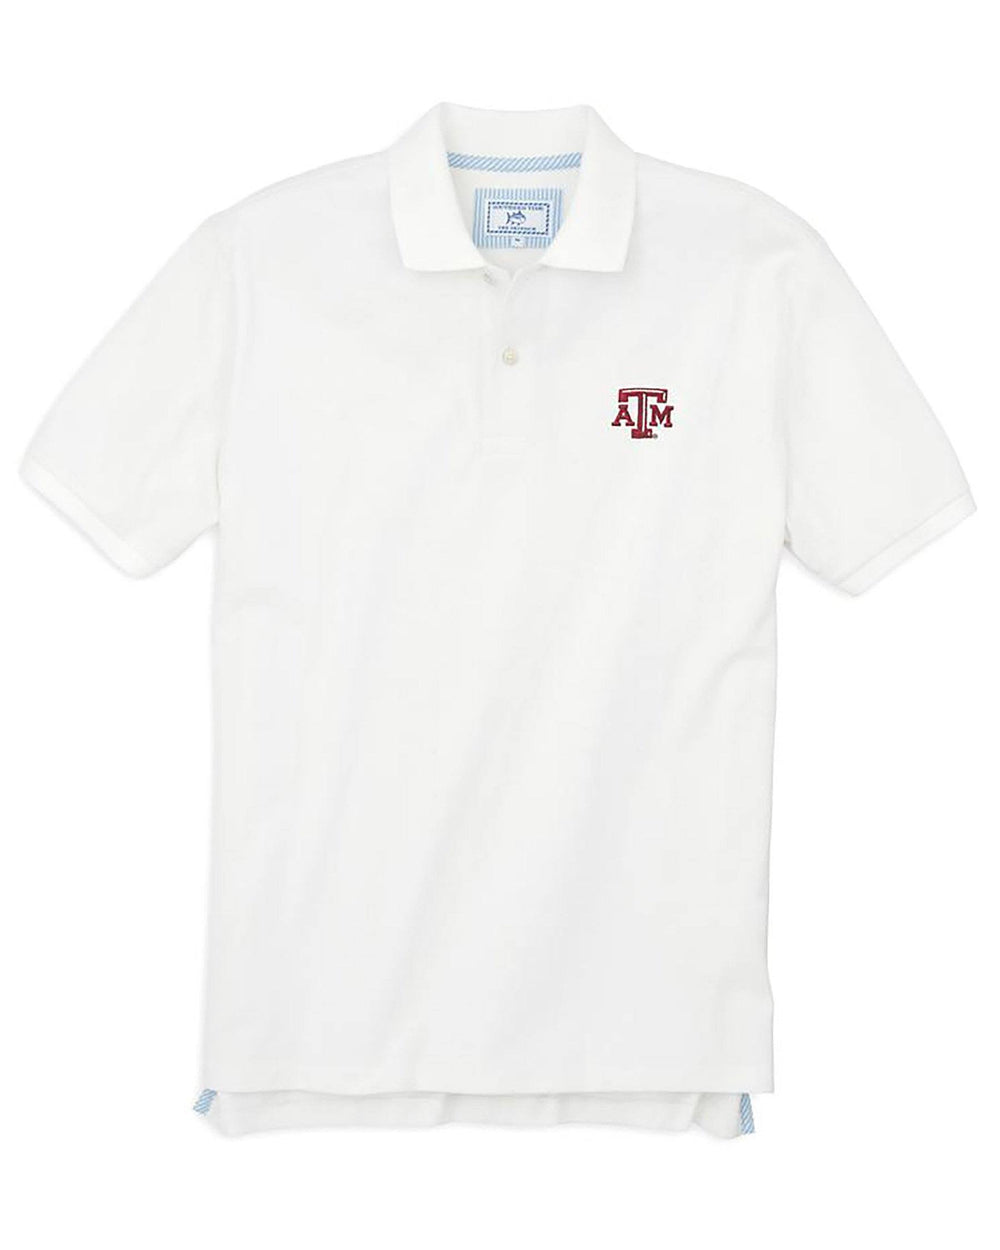 The front view of the Men's White Texas A&M Aggies Pique Polo Shirt by Southern Tide - Classic White